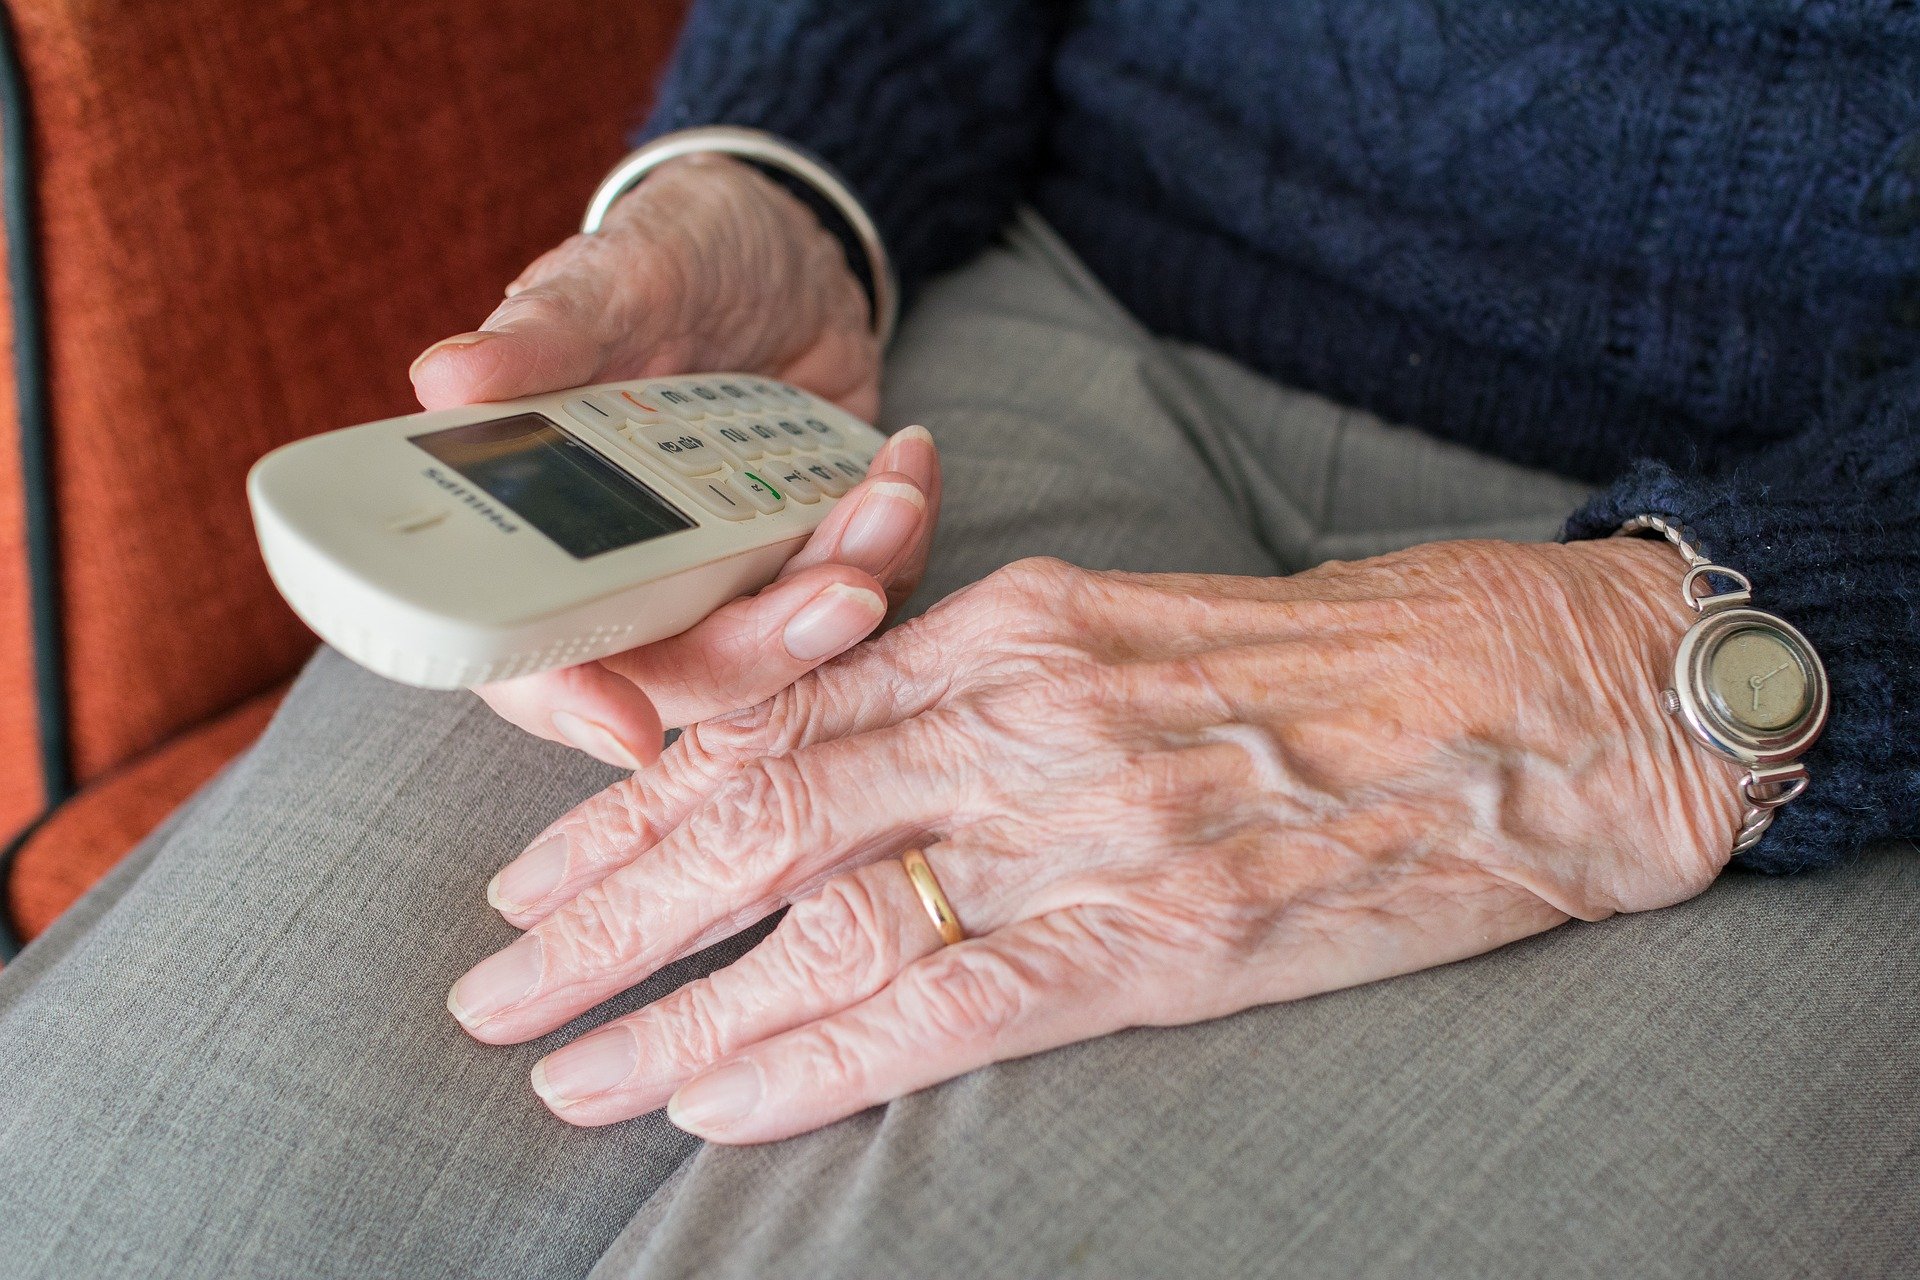 Pictured - An elderly woman holding a cellphone | Source: Pixabay